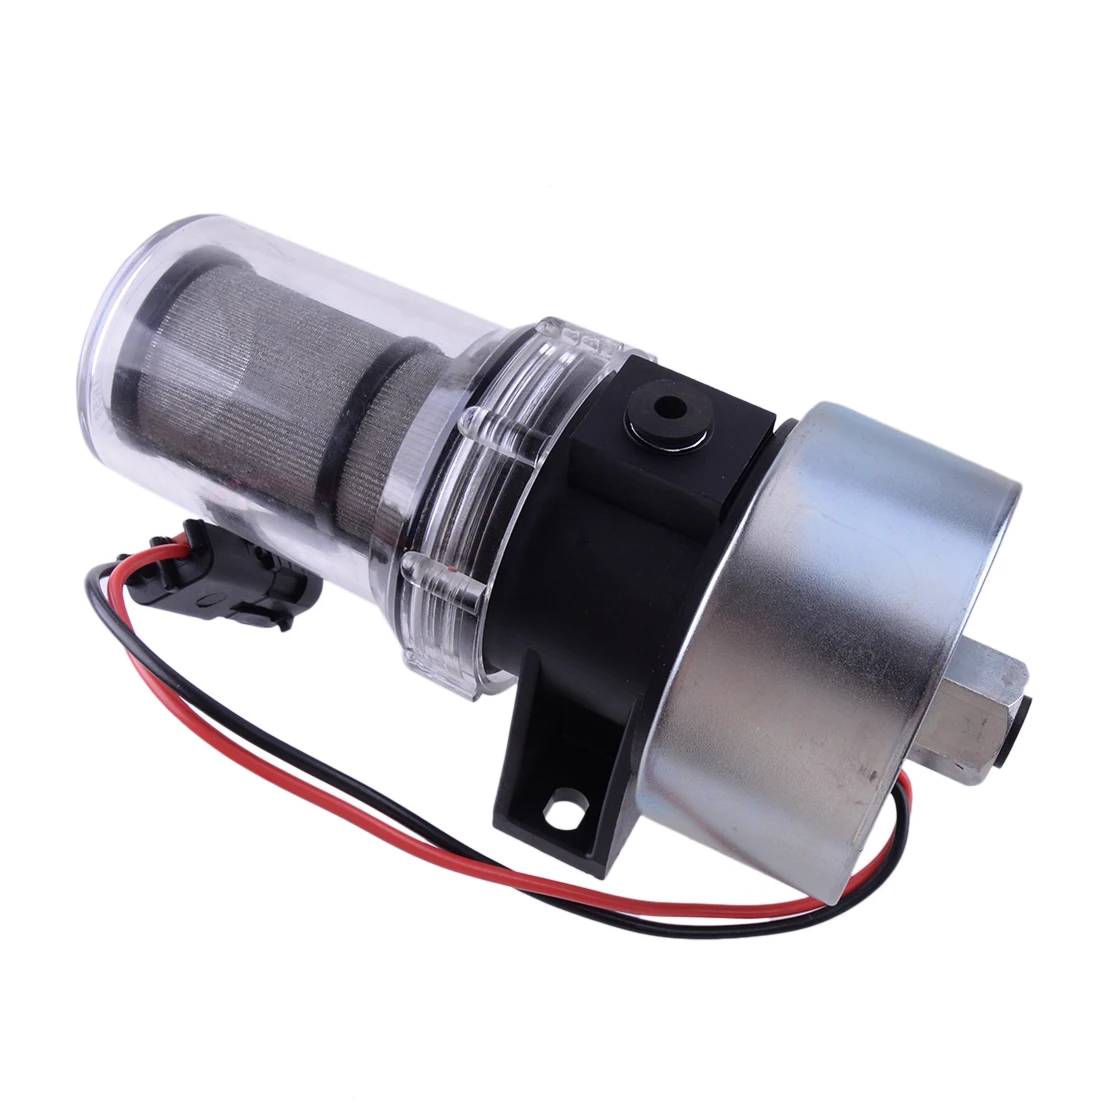 

Diesel Fuel Pump 12V 41-7059 30-01108-03 Fit for Thermo King Carrier MD KD RD TS URD XDS TD LND AM2 AMDM2 CDMAX SuperNWD5100